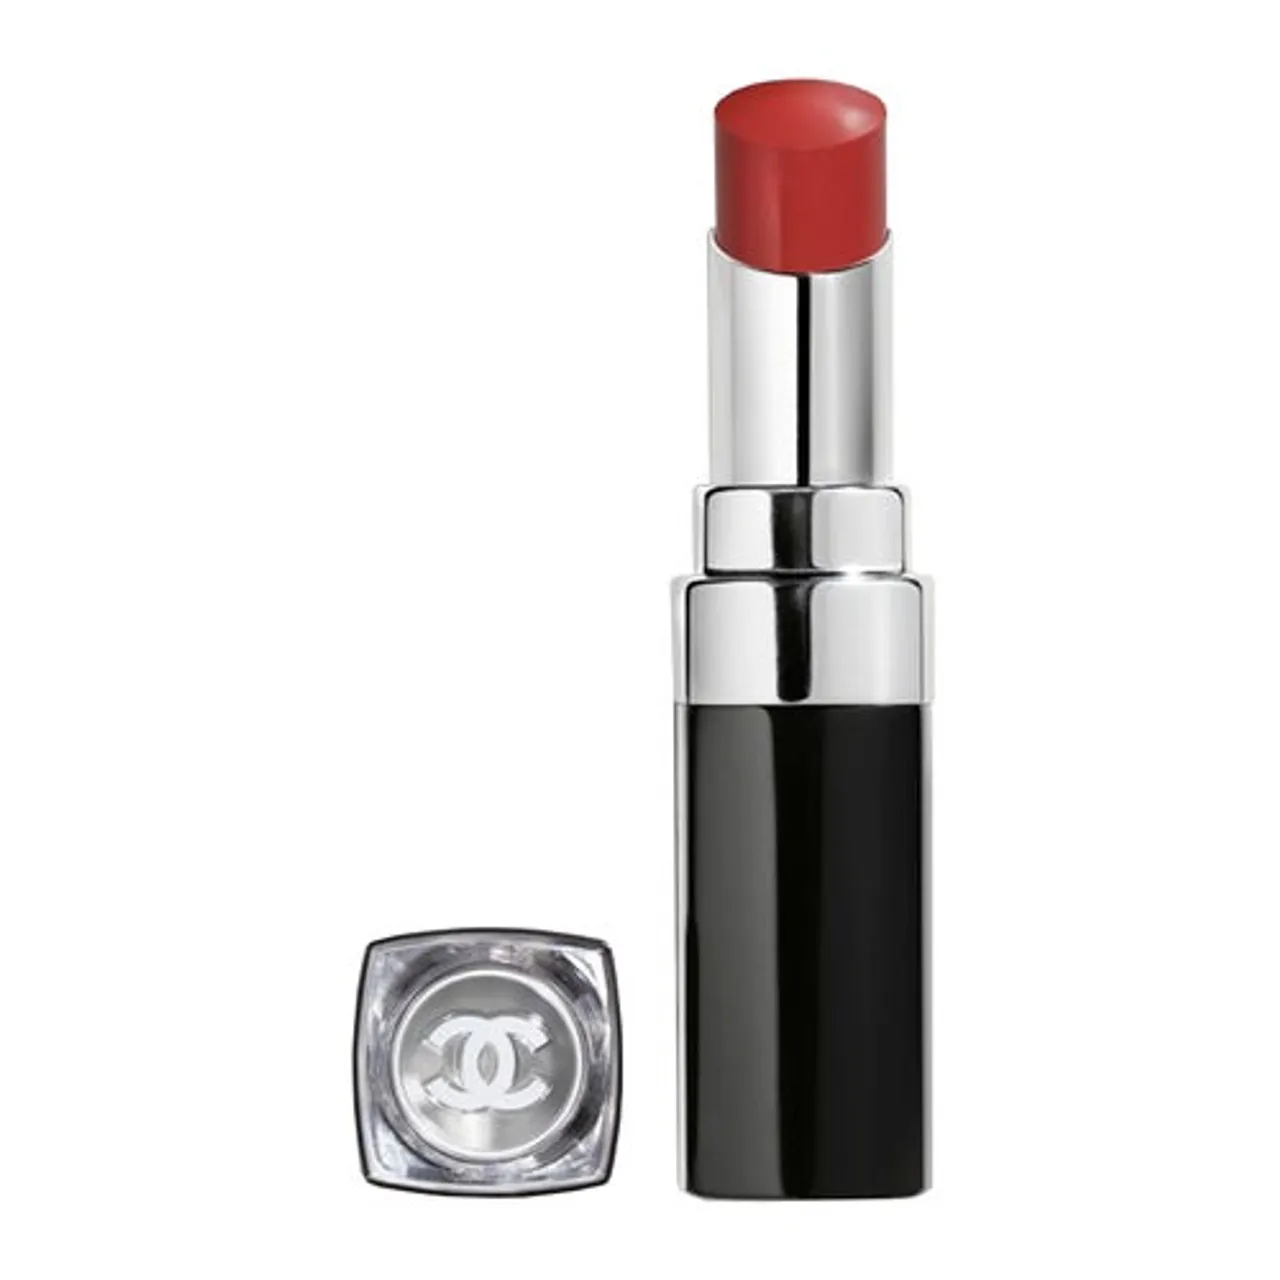 Chanel Rouge Coco Bloom Plumping Lipstick 134 Sunlight 3 gram